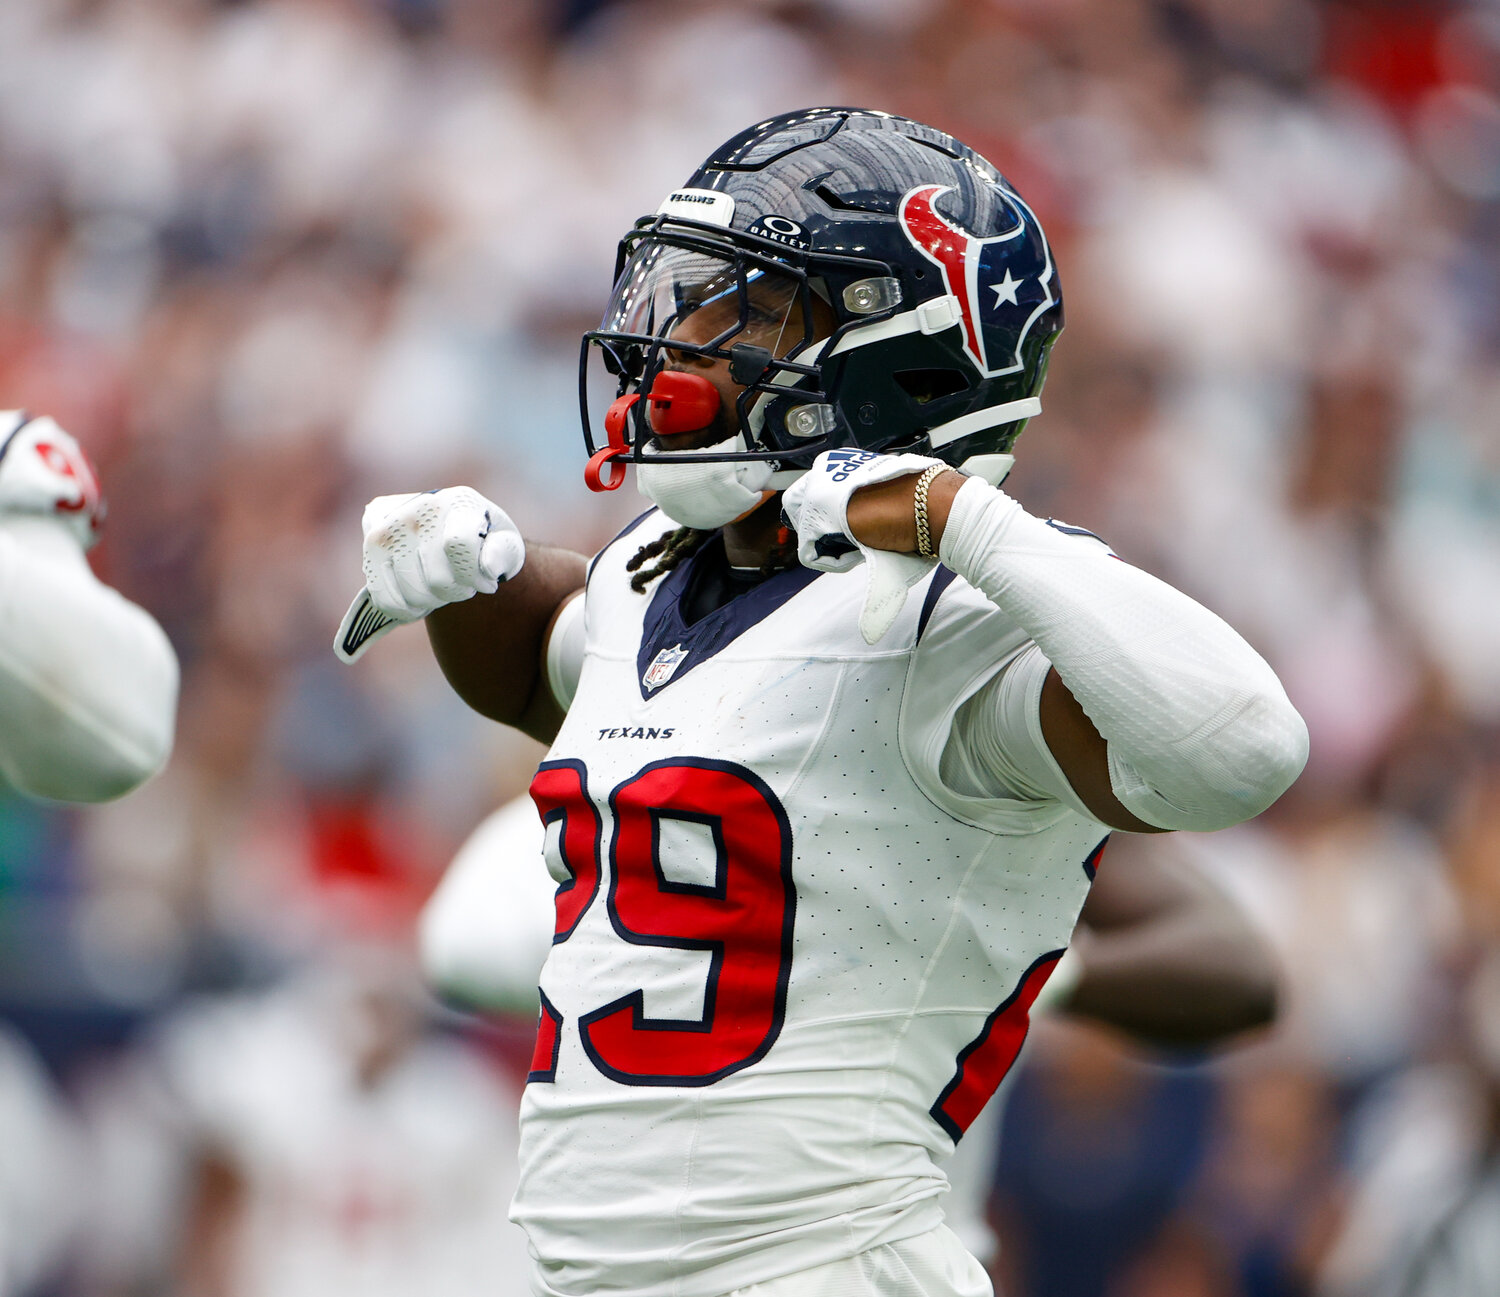 Texans safety M.J. Stewart (29) reacts after a play during an NFL game between the Texans and the Colts on September 17, 2023 in Houston. The Colts won, 31-20.